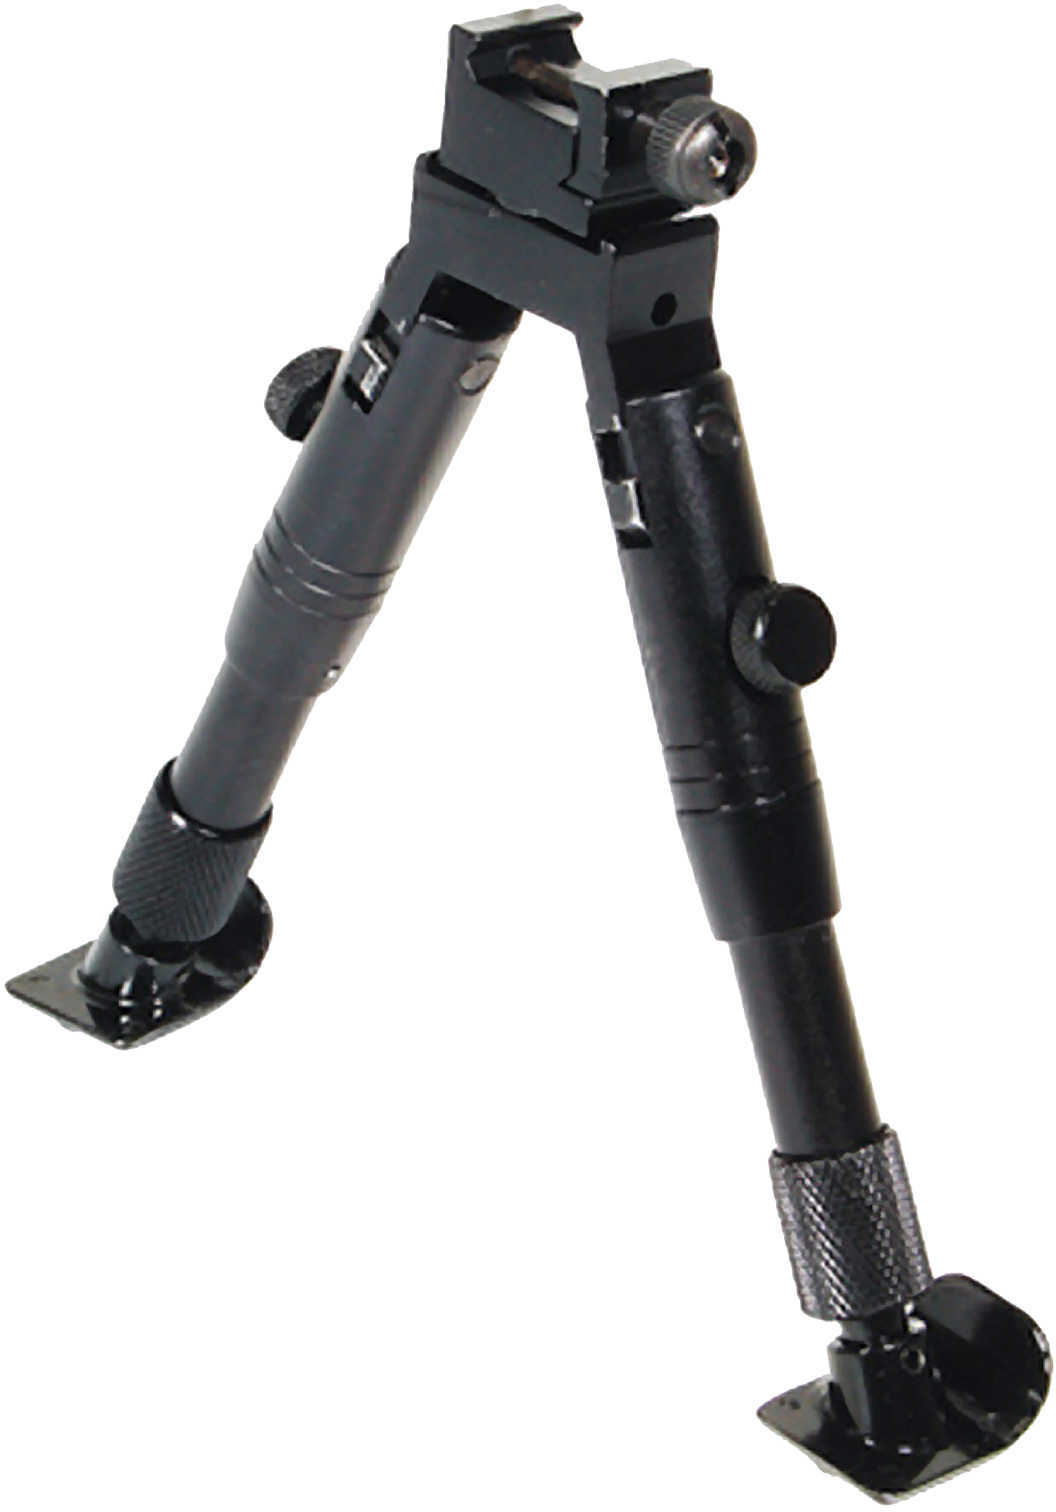 Leapers, Inc. Steel Feet Bipod Shooter's, Height 5.5"-6.8" Md: Tl-BP28St